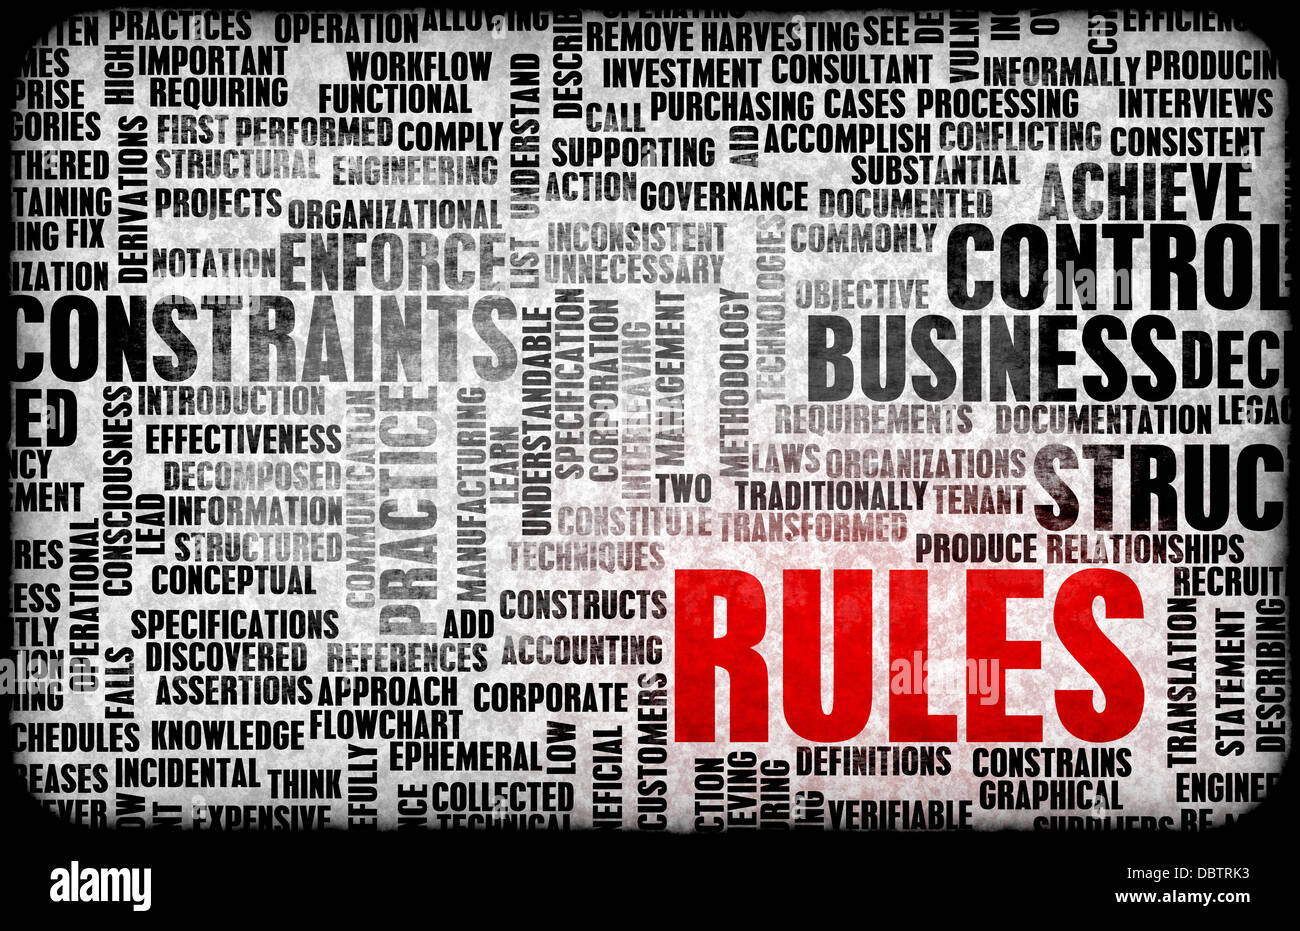 Rules and Regulations for Law or Legal Scenarios Stock Photo